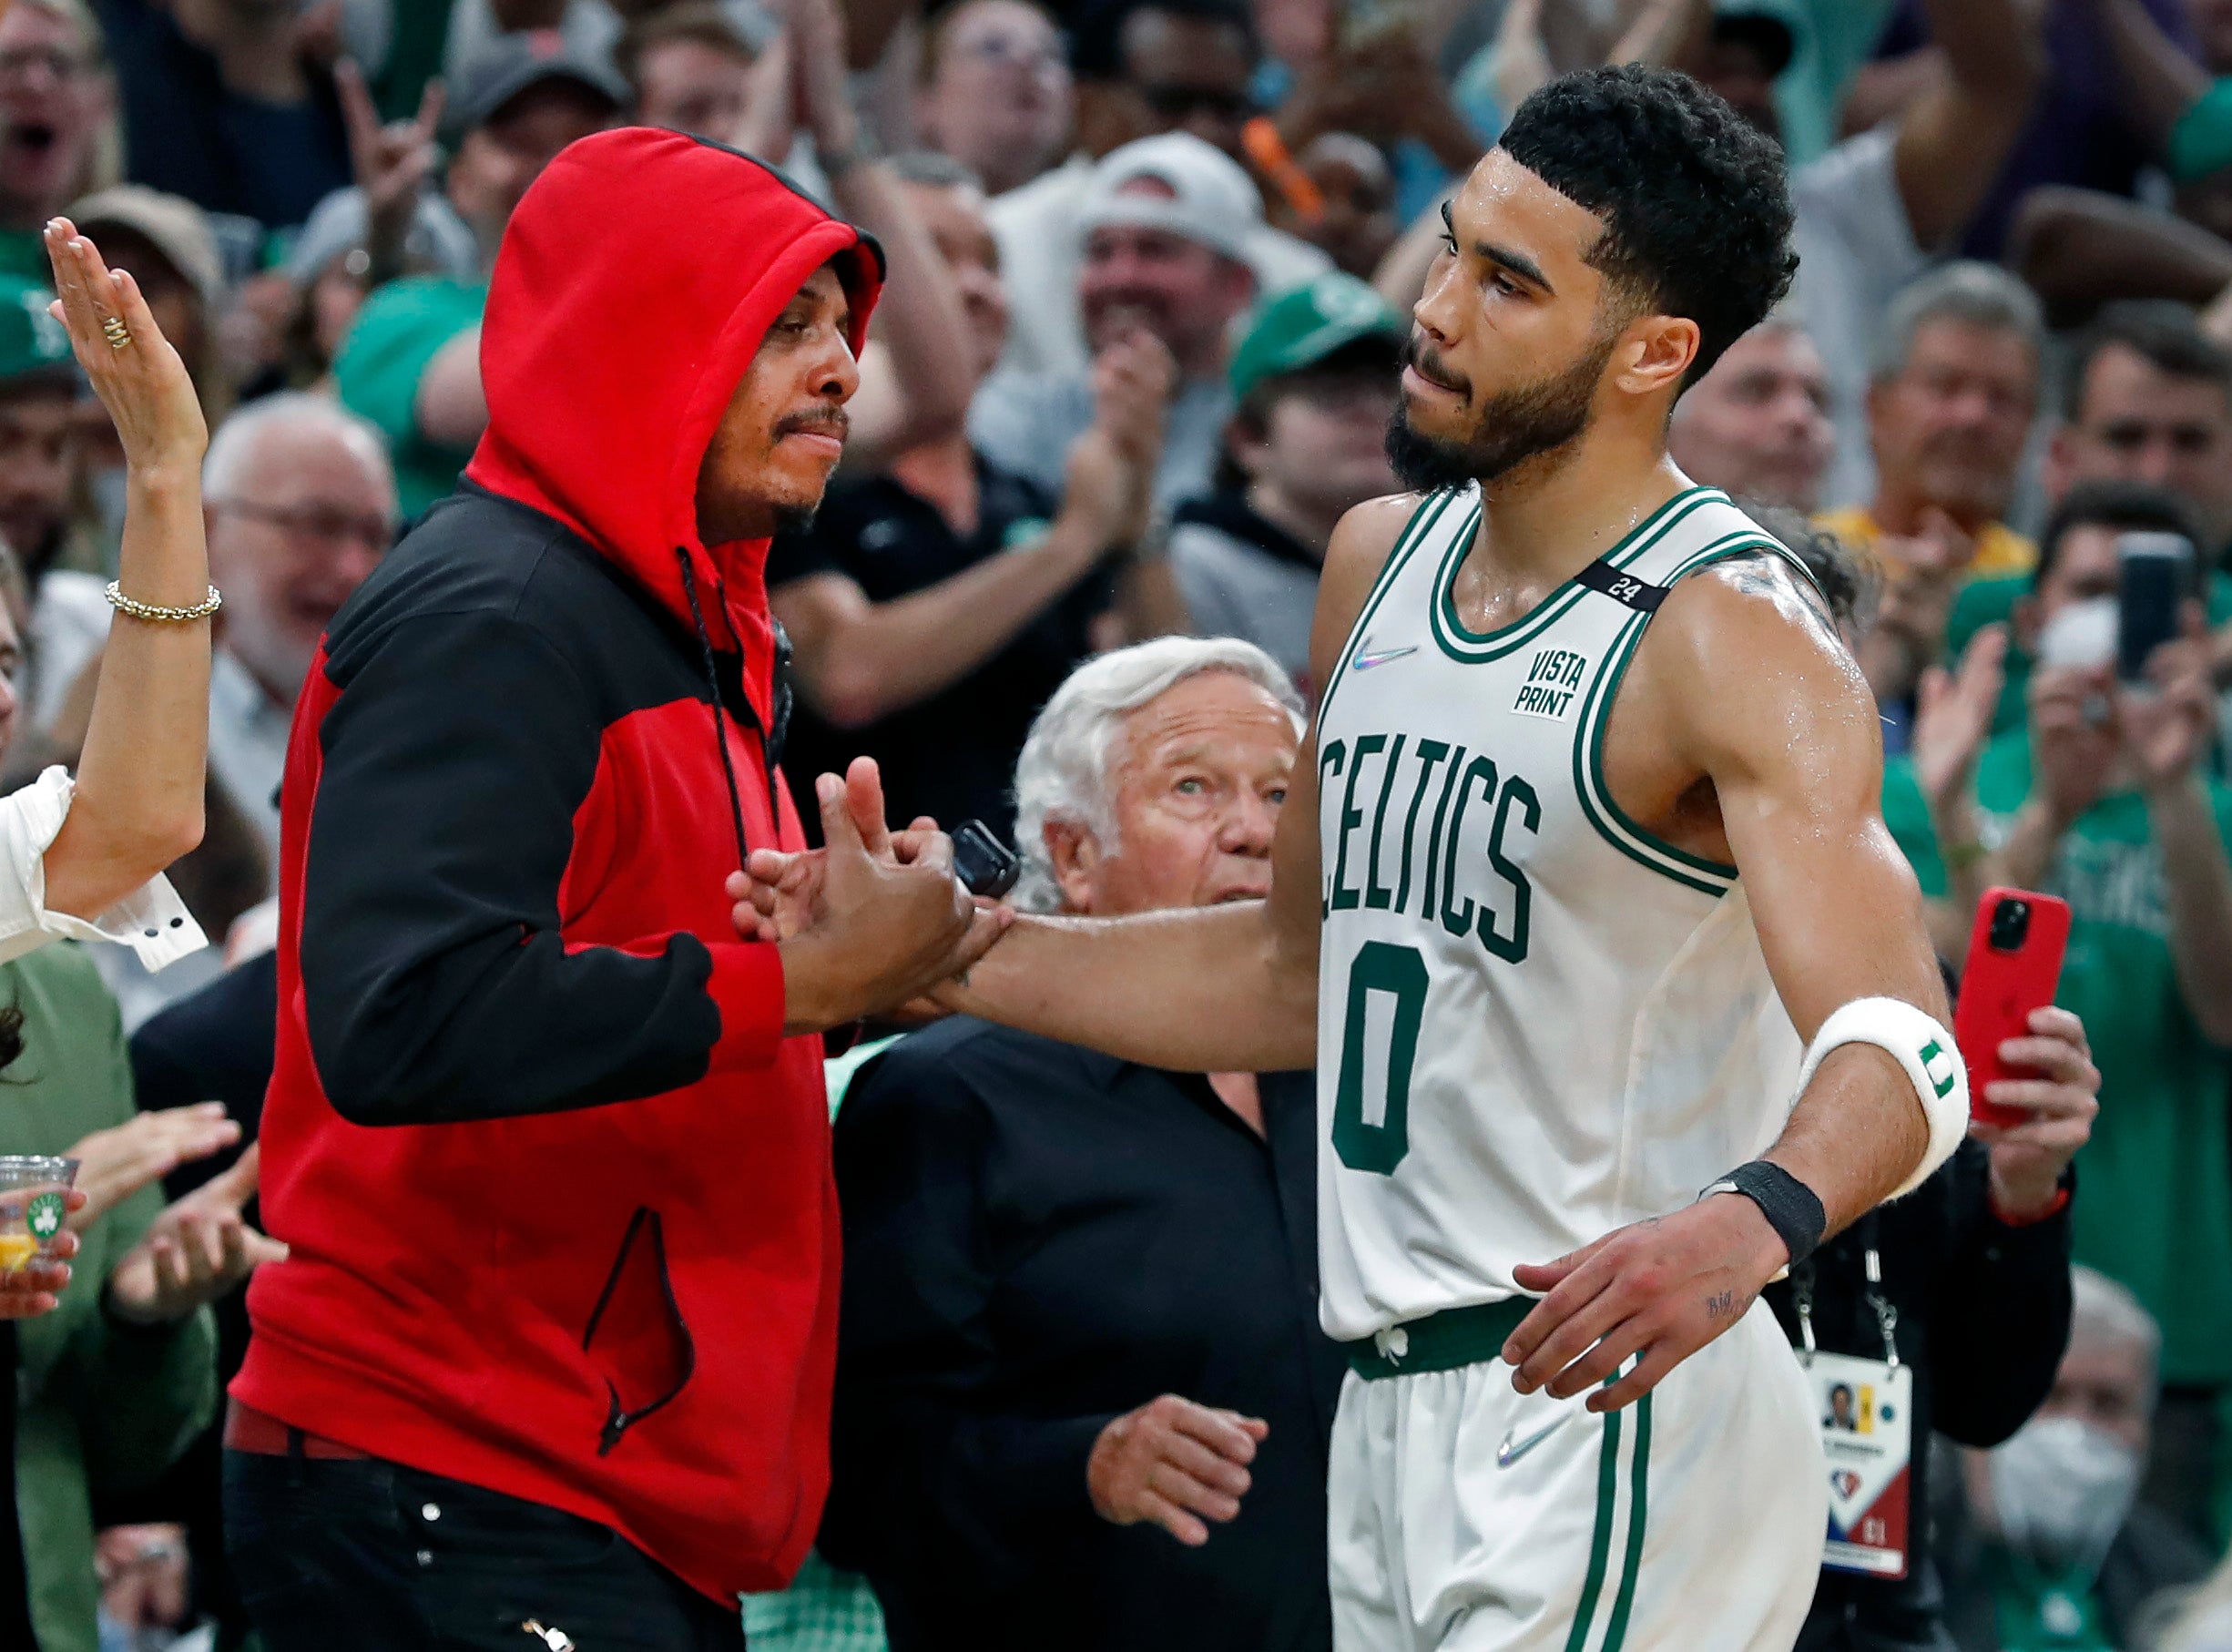 The Celtics Jayson Tatum gets a hand from NBA Hall of Famer Paul Pierce as he leaves the game. New England Patriots owner Robert Kraft is in between them. The Boston Celtics hosted the Milwaukee Bucks for Game Seven of their NBA basketball Eastern Conference Semi-Final Playoff series at the TD Garden.